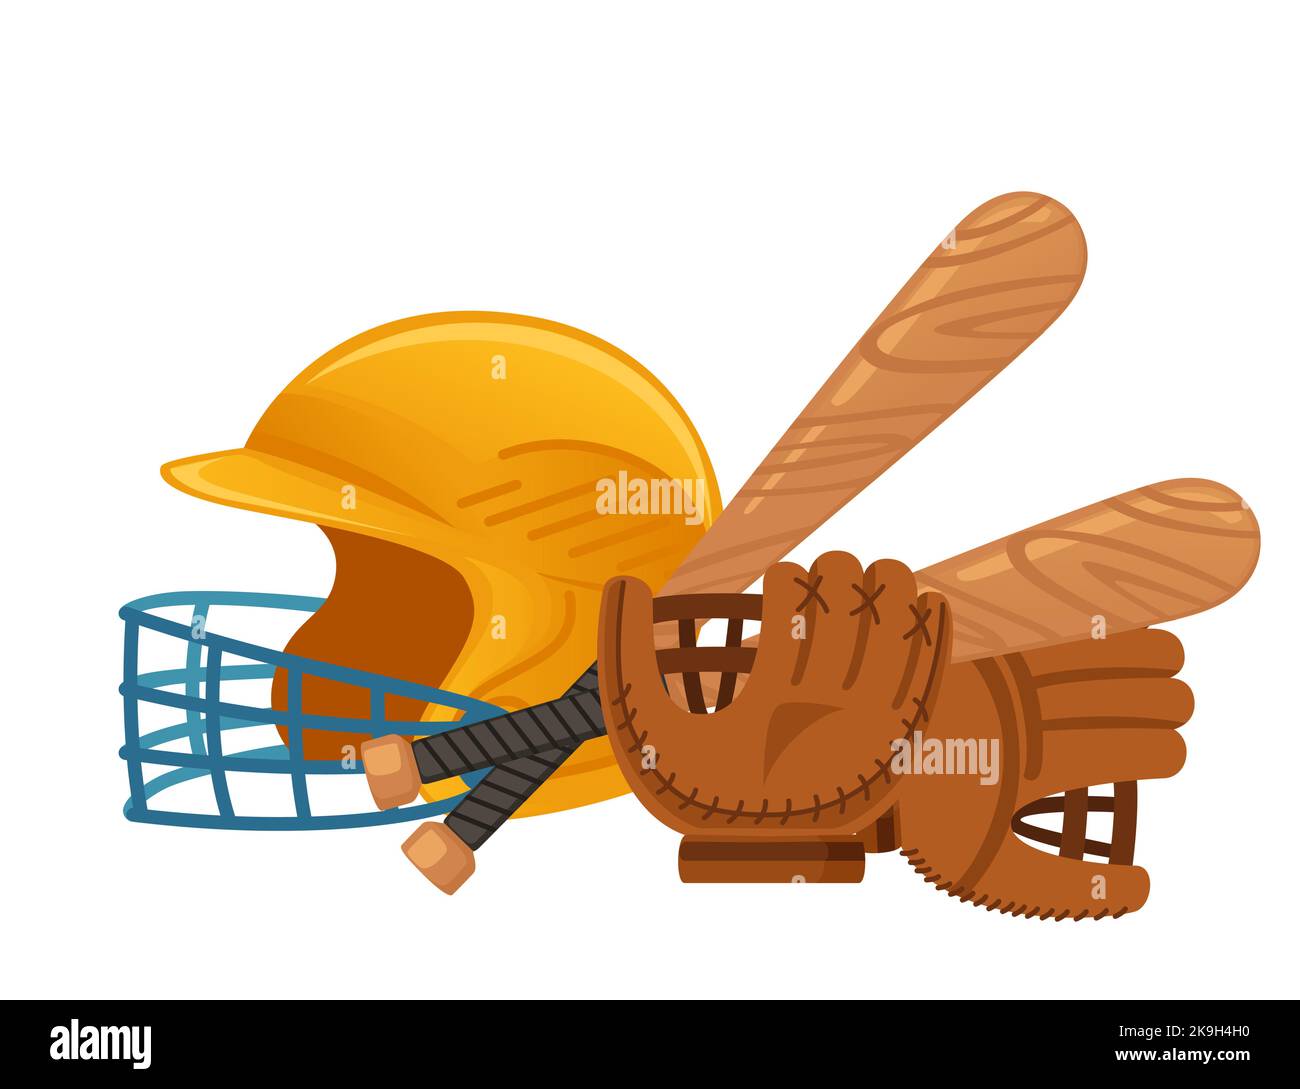 Wooden baseball bat with leather protective glove and helmet vector illustration isolated on white background Stock Vector